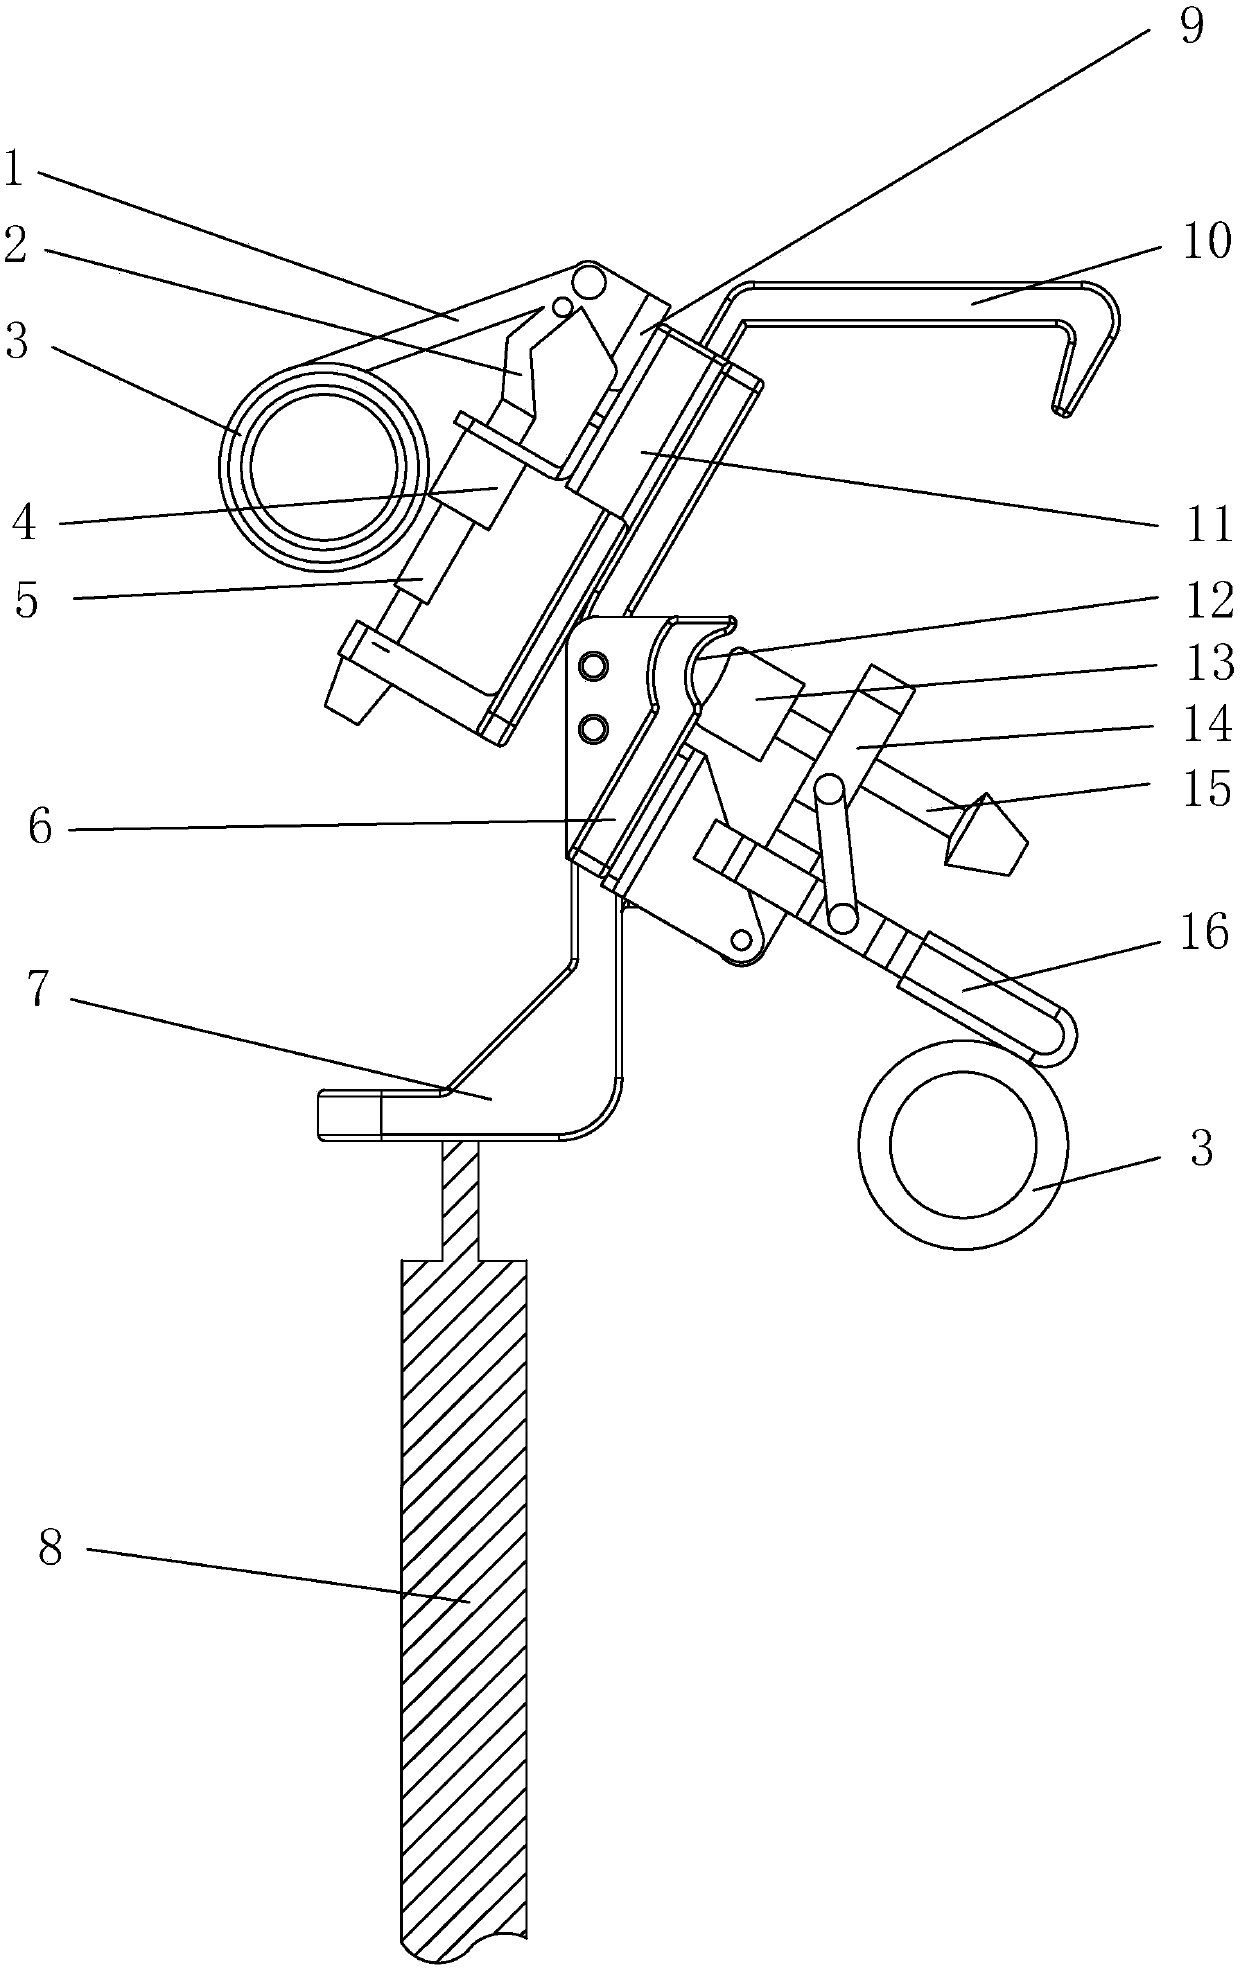 J-shaped wire clamp operating member